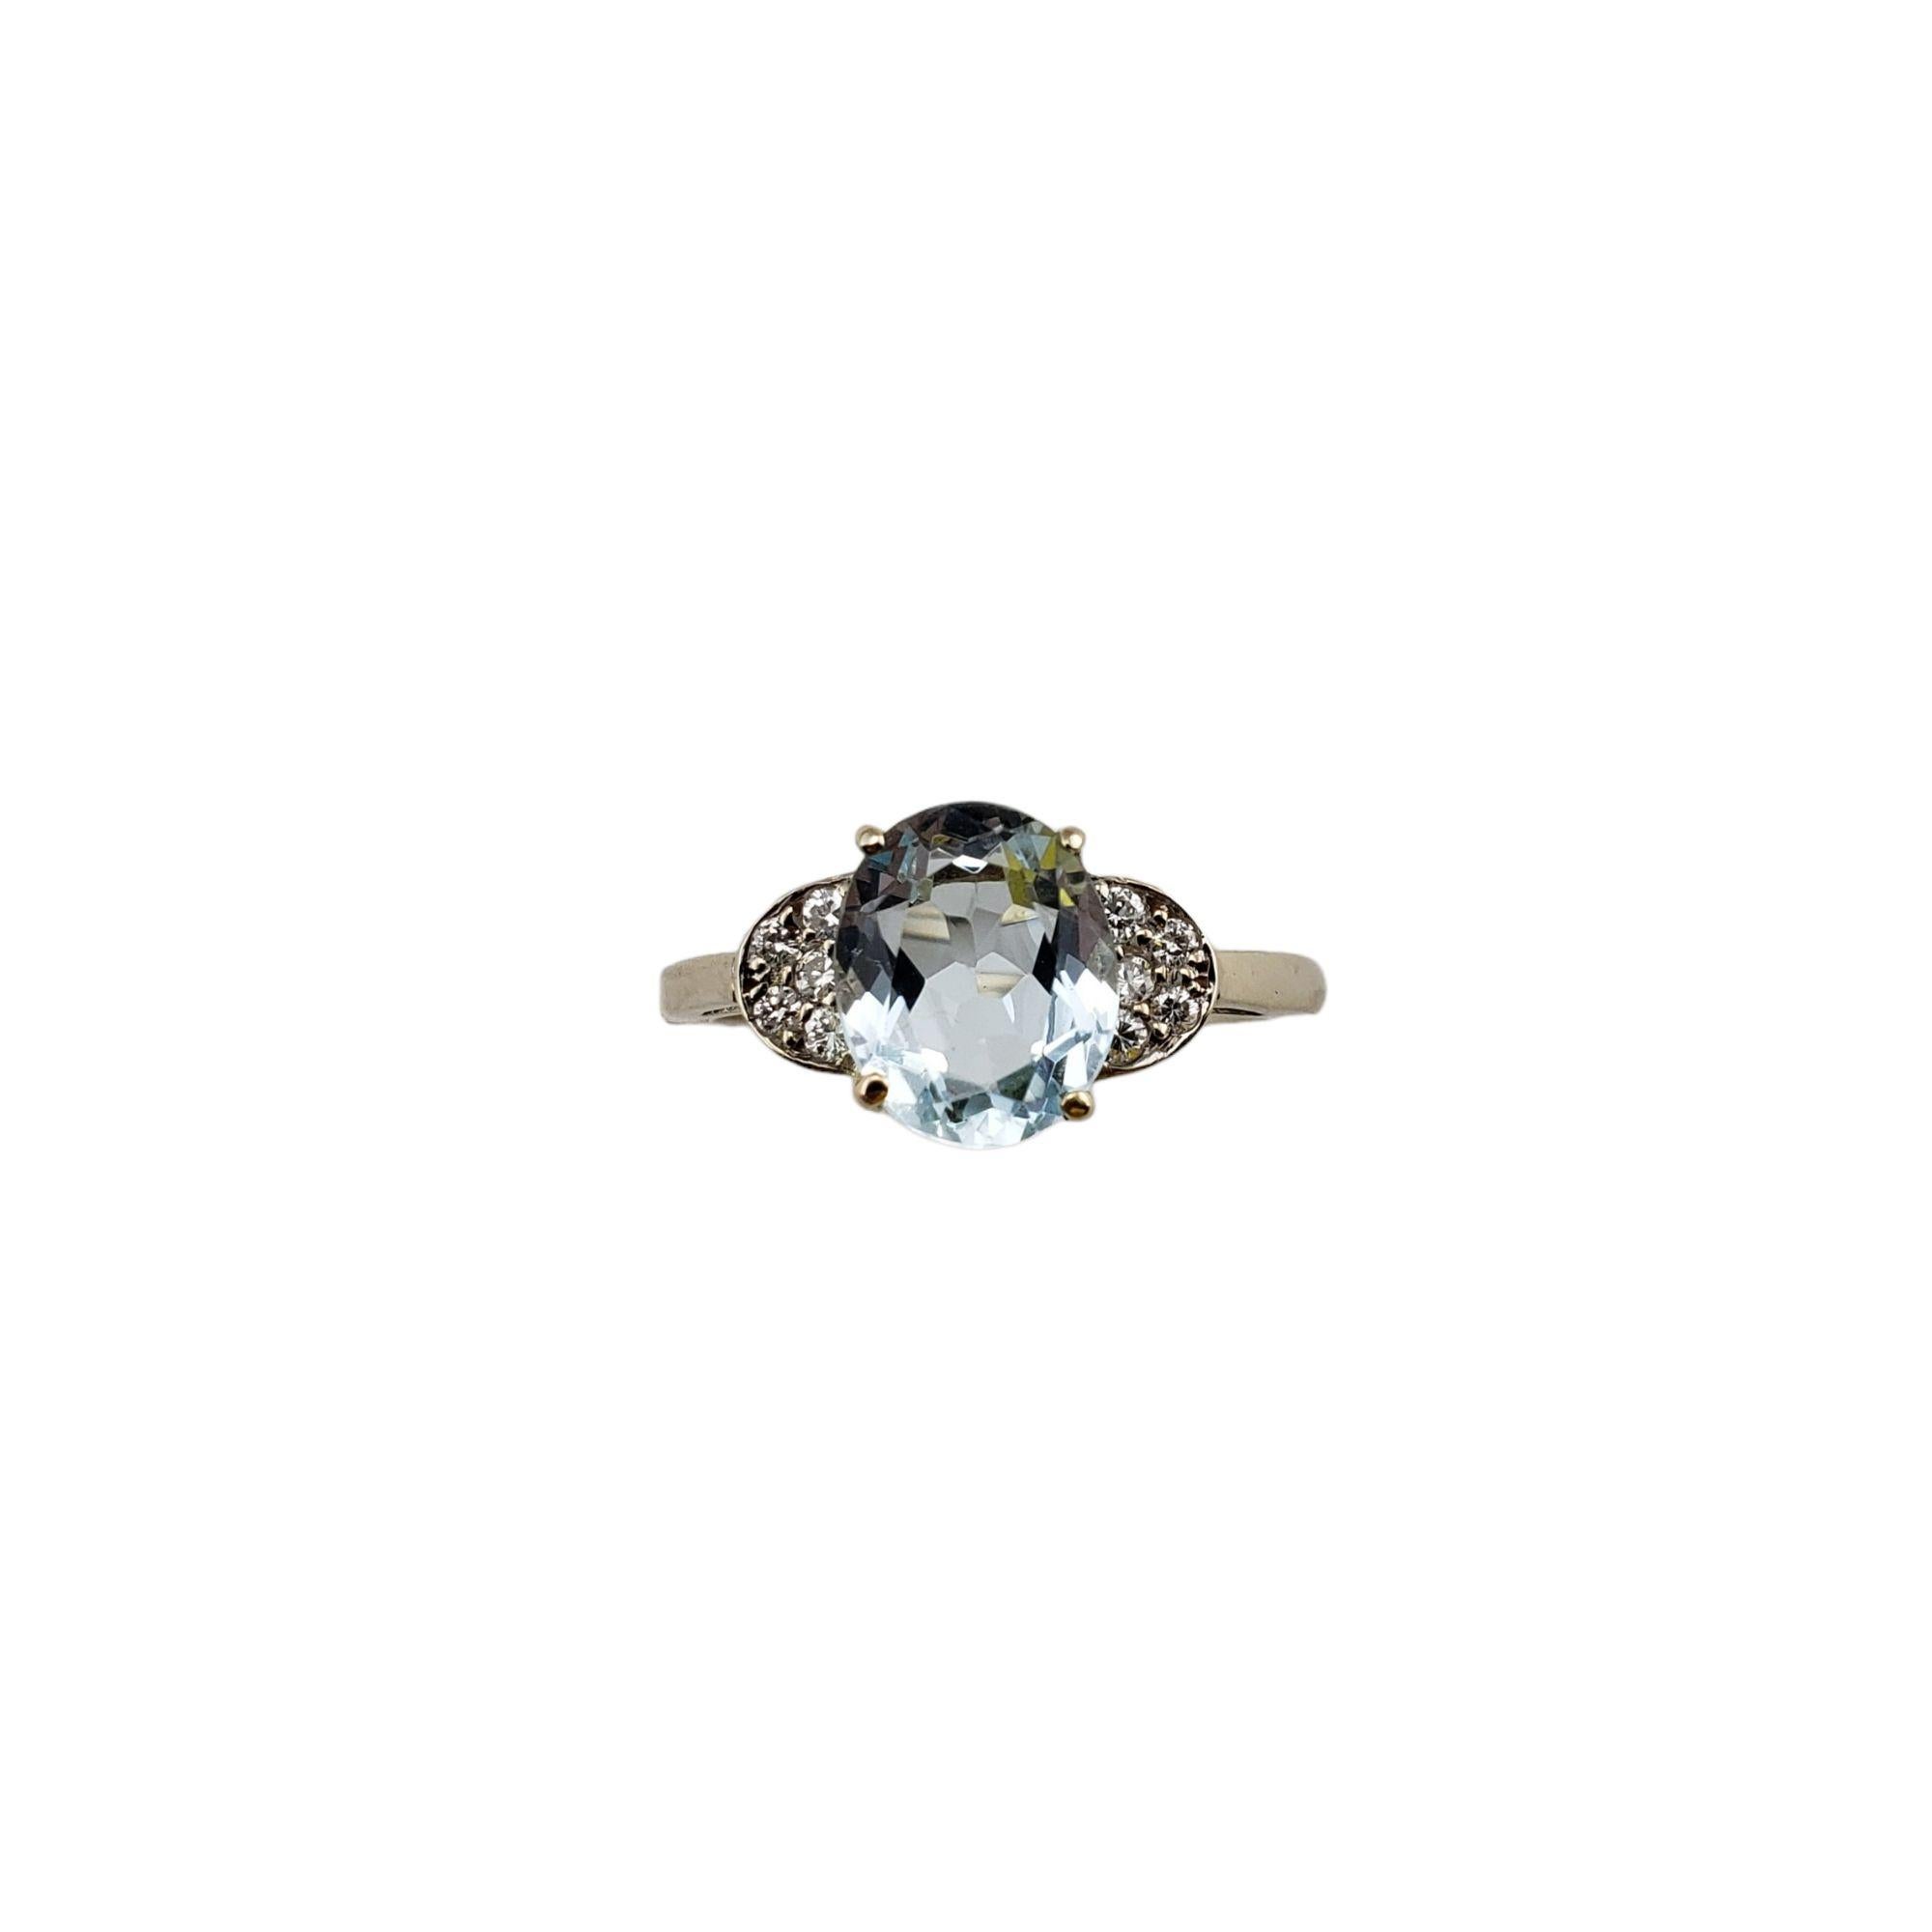 Vintage 14 Karat White Gold Aquamarine and Diamond Ring JAGi Certified Size 8.5-

This stunning ring features one oval aquamarine (10 mm x 8 mm) and ten round brilliant cut diamonds set in classic 14K white gold. Shank: 1.5 mm.

Total Aquamarine